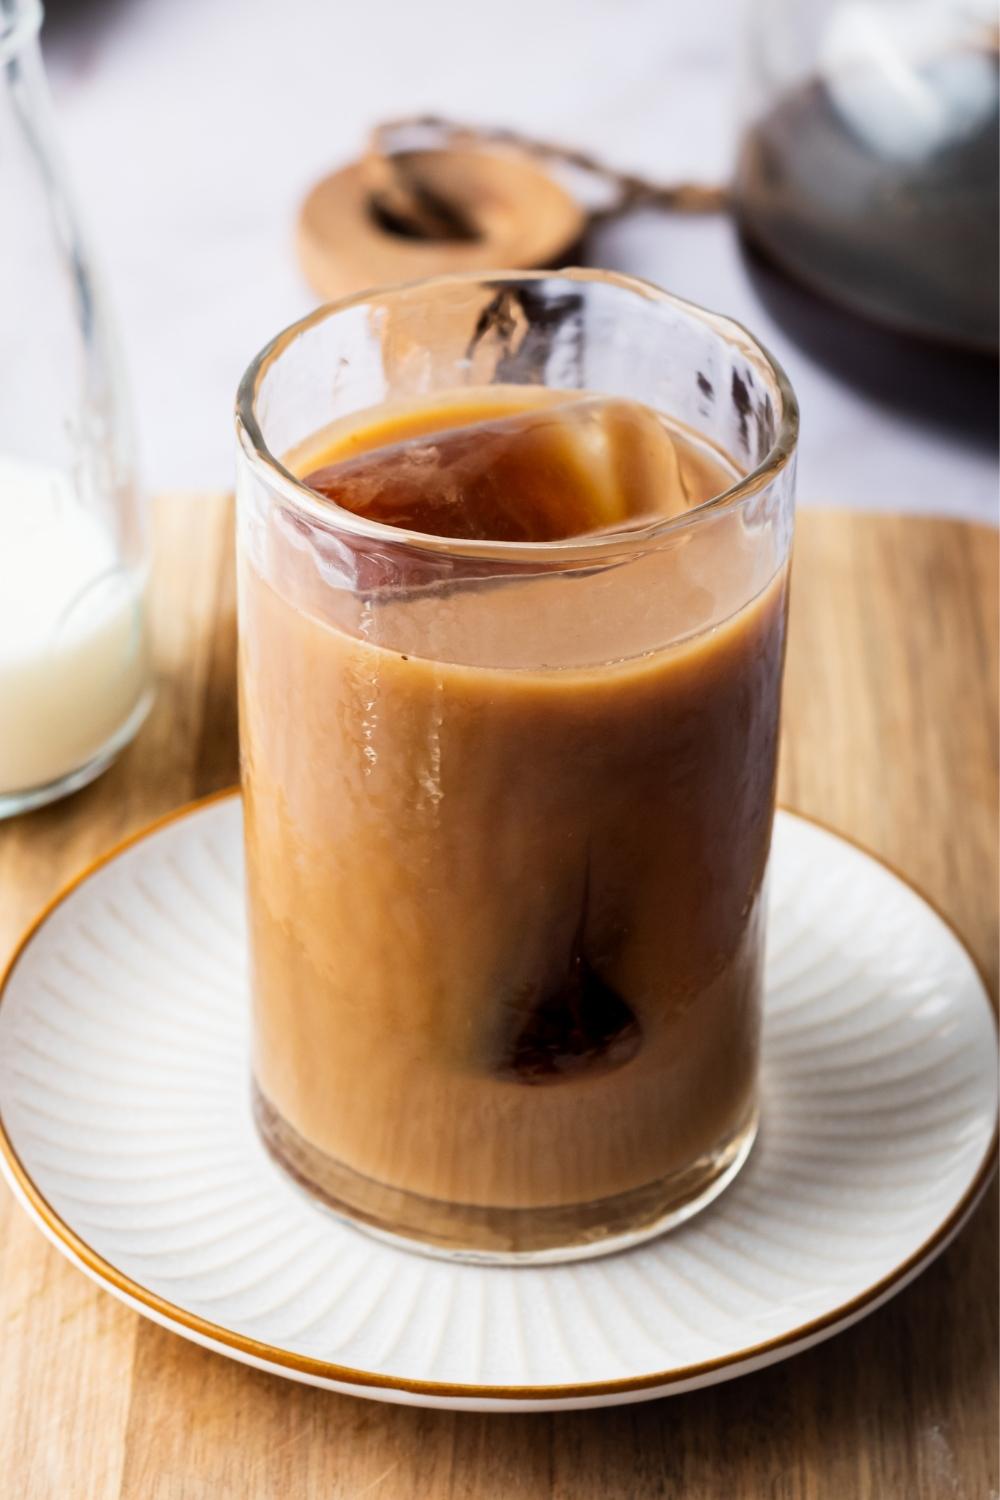 A glass containing iced coffee with cream in it sitting on a saucer.